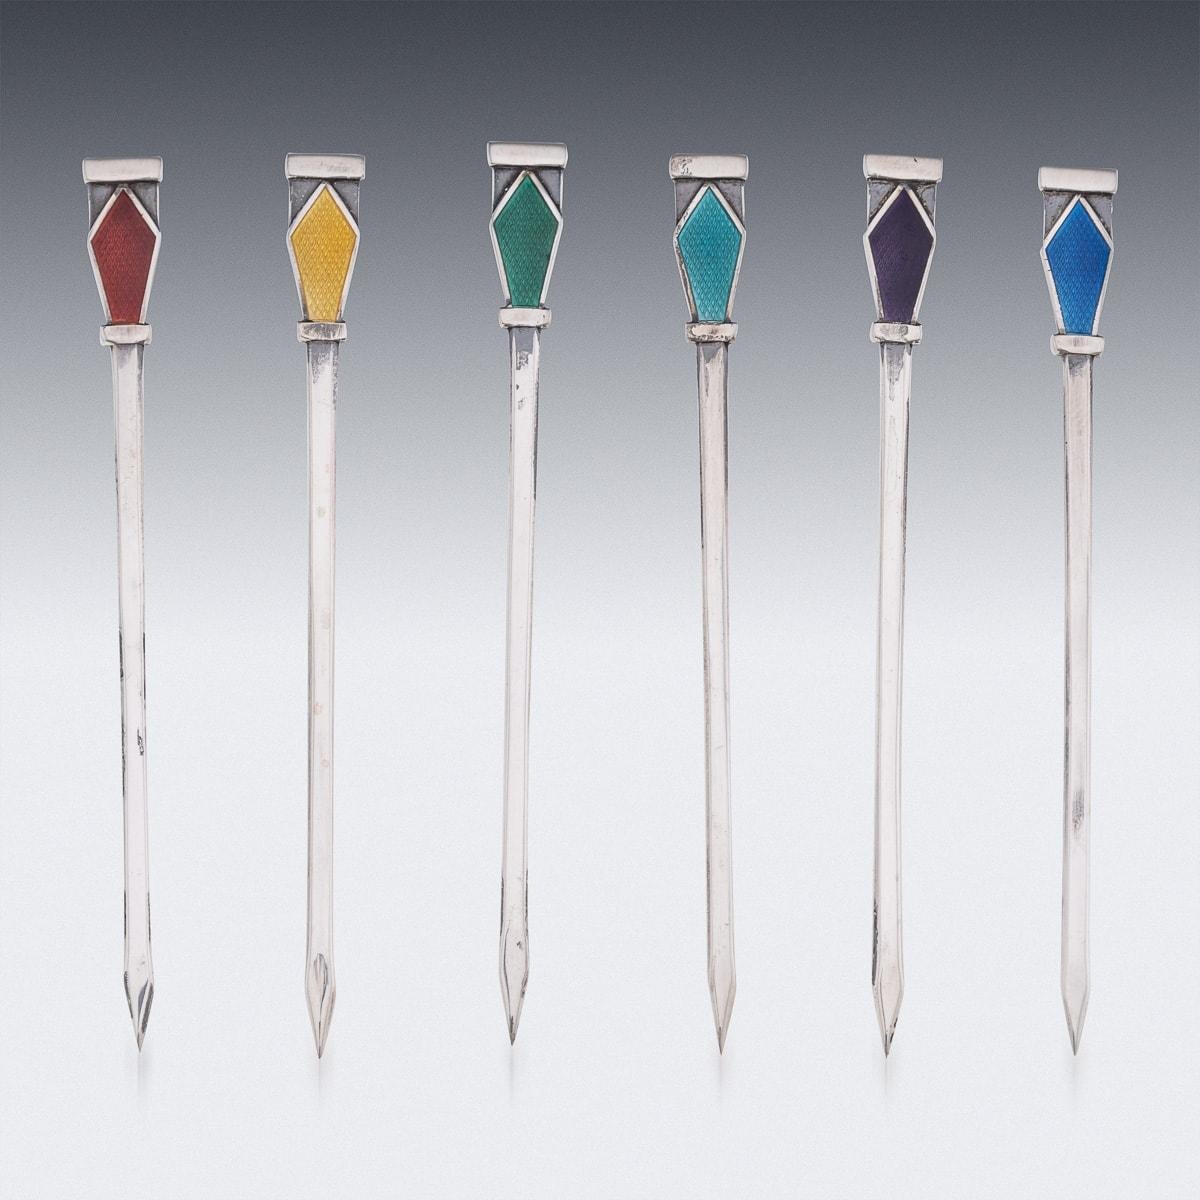 Antique 20th Century British Art Deco solid silver set of six cocktail picks, decorated with multi-coloured guilloche enamels. The set comes in its original leatherette and velvet lined box. Each piece is Hallmarked English silver (925 Standard),